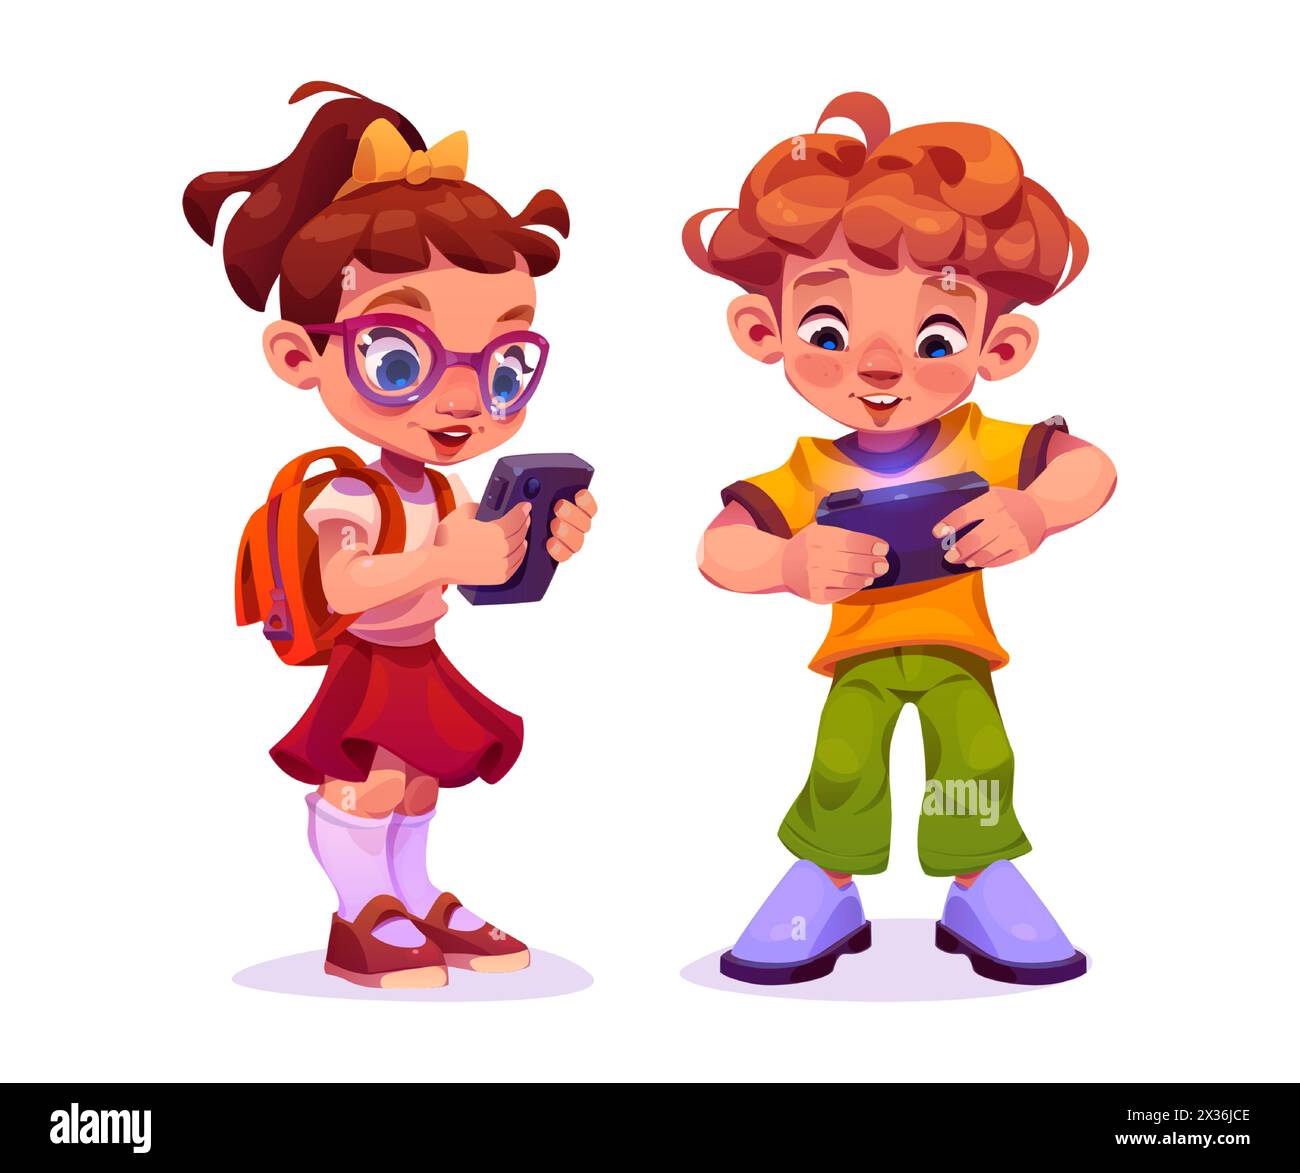 Kids playing game on mobile phone. Cartoon vector illustration set of little boy and girl with backpack standing and using smartphone. Cute happy smiling children player with digital gadget. Stock Vector